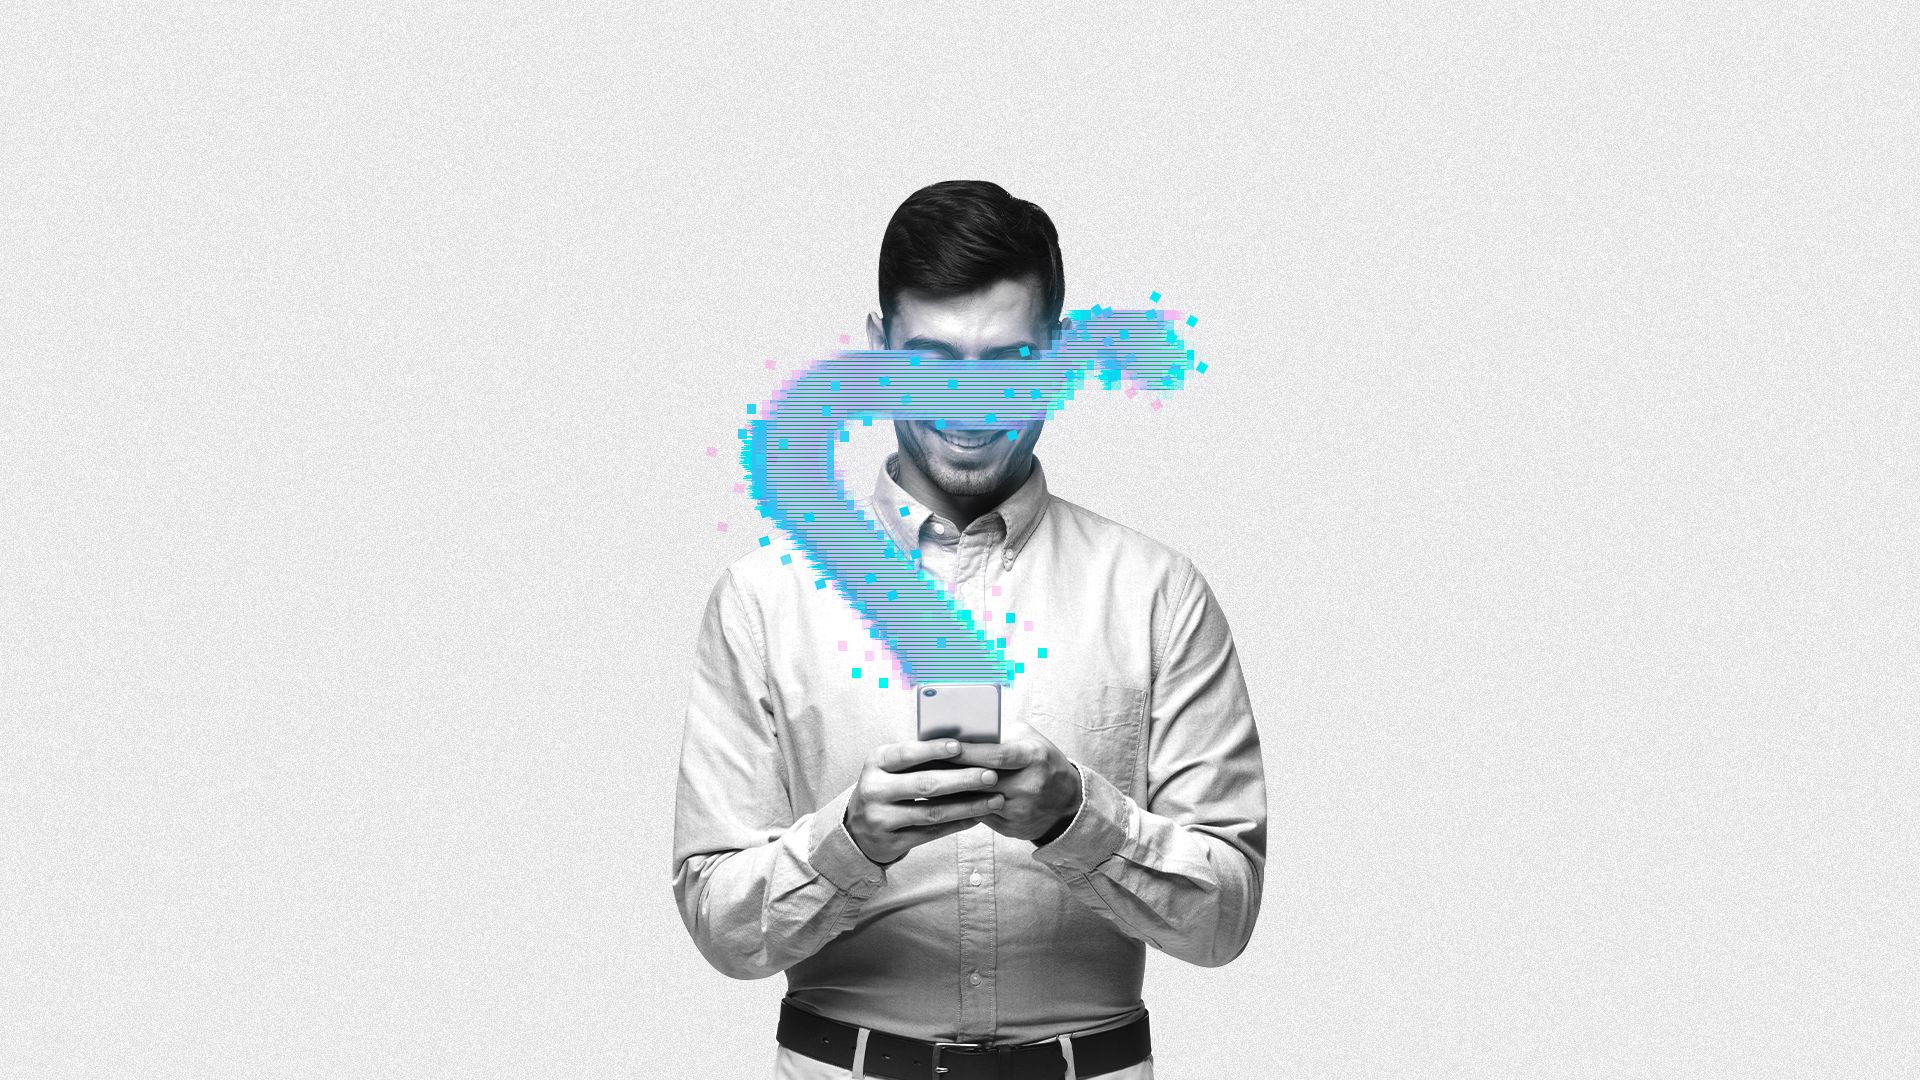 In this image, a man holds a smartphone and a digital line emitted from the phone covers his eyes.